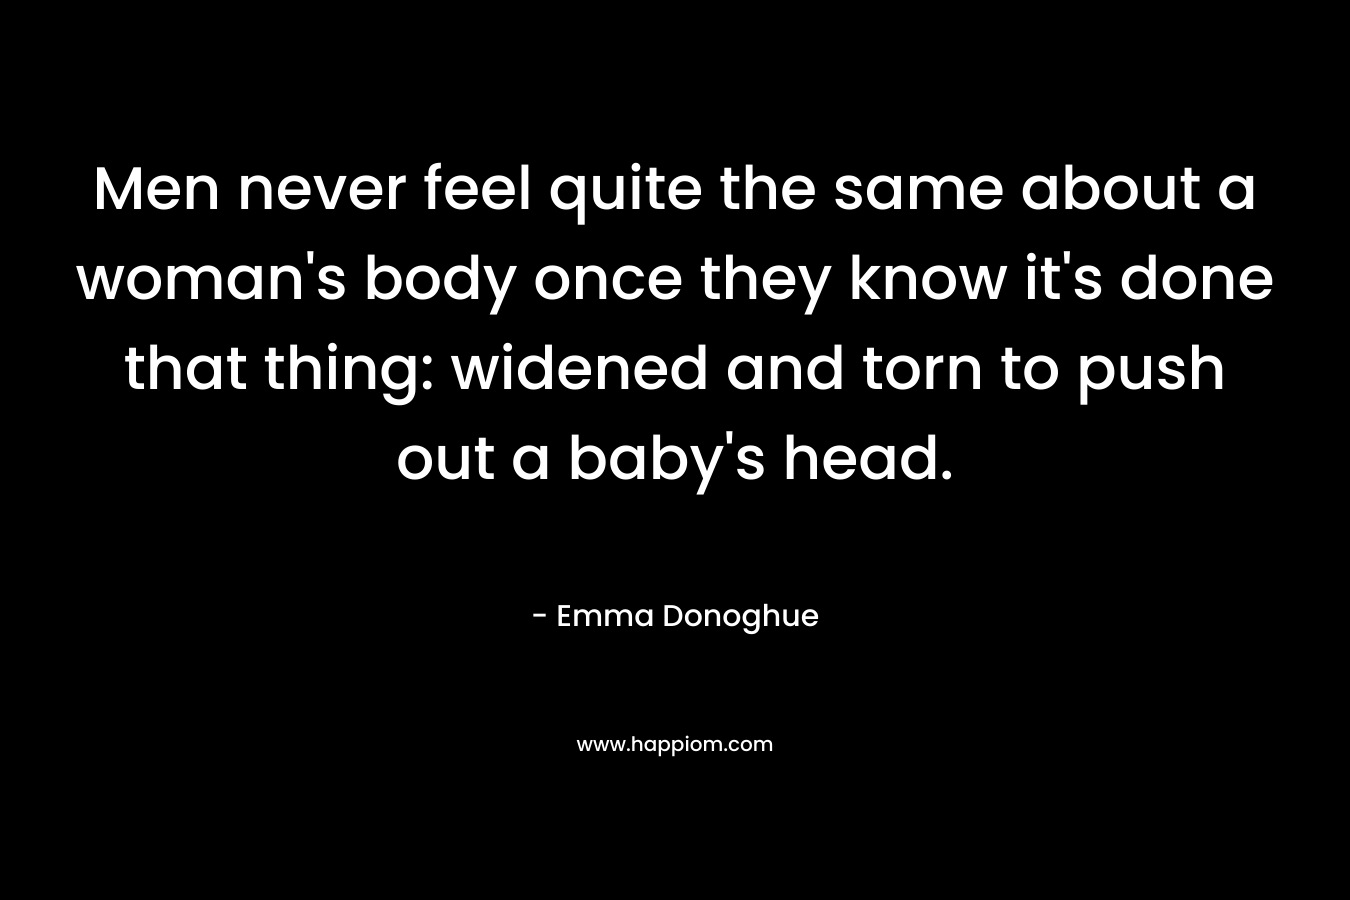 Men never feel quite the same about a woman’s body once they know it’s done that thing: widened and torn to push out a baby’s head. – Emma Donoghue